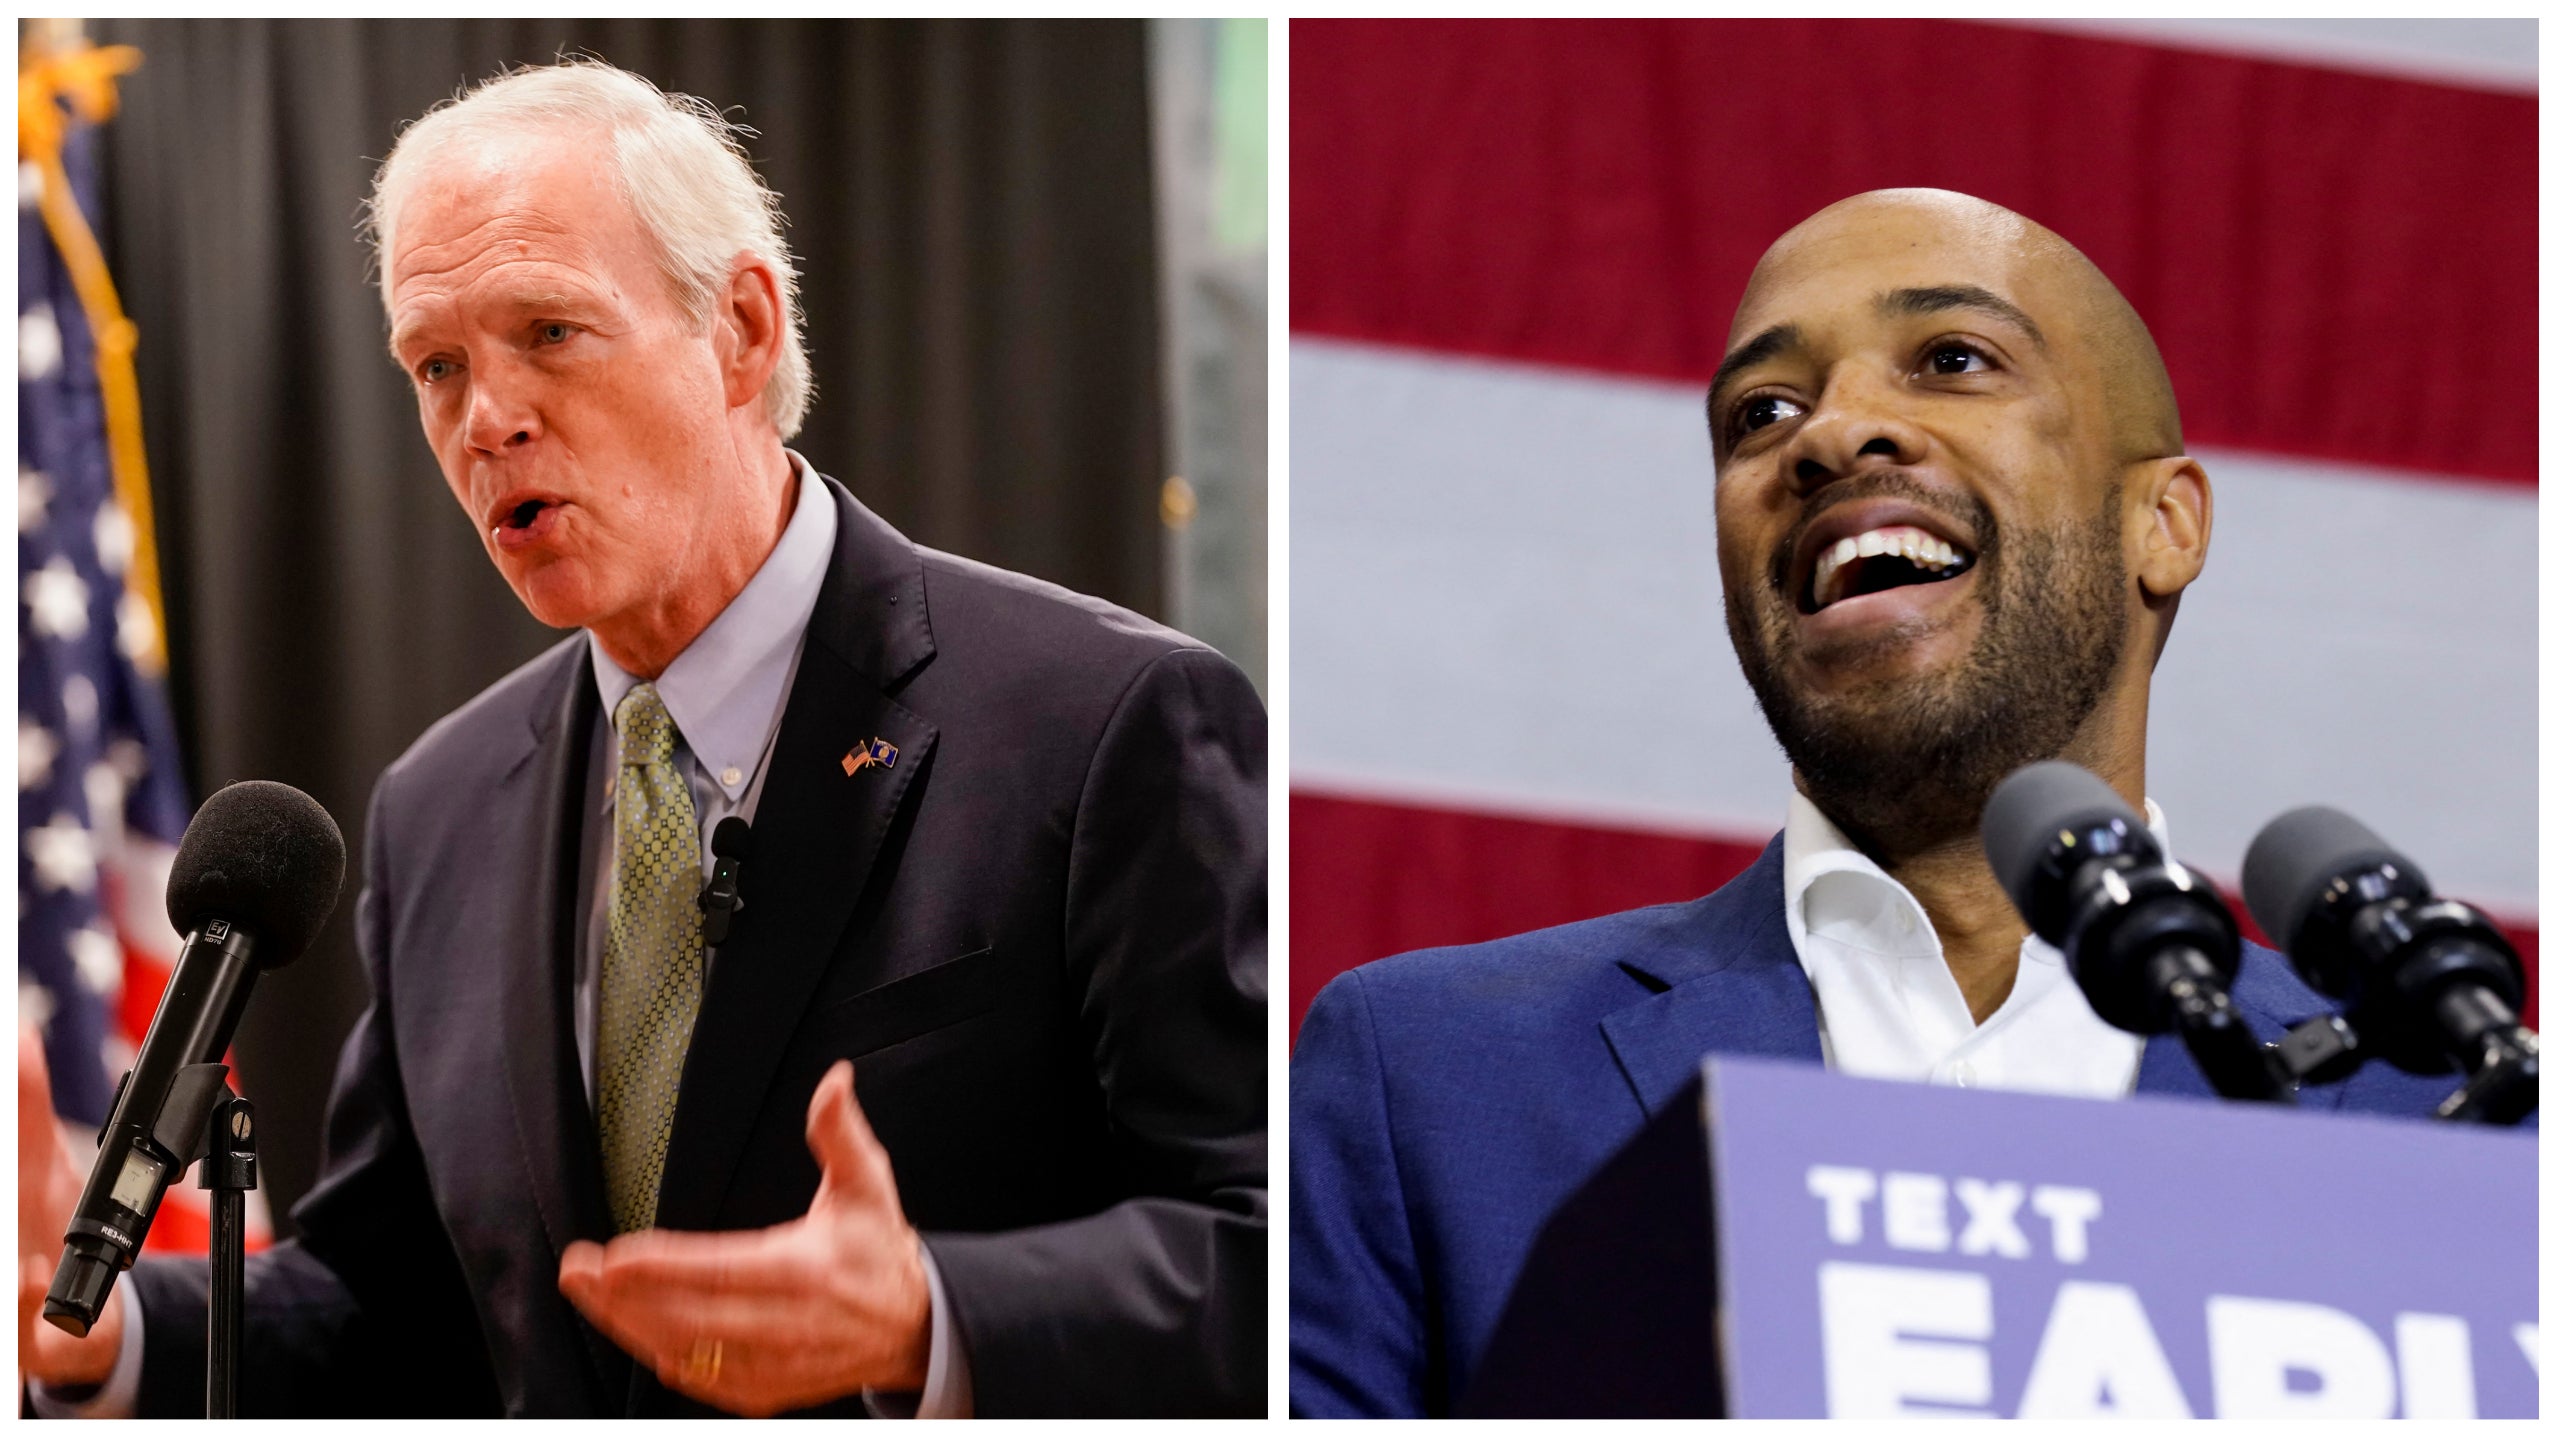 Wisconsin Senator Ron Johnson, left, is in a tight race for reelection against Lt. Governor Mandela Barnes